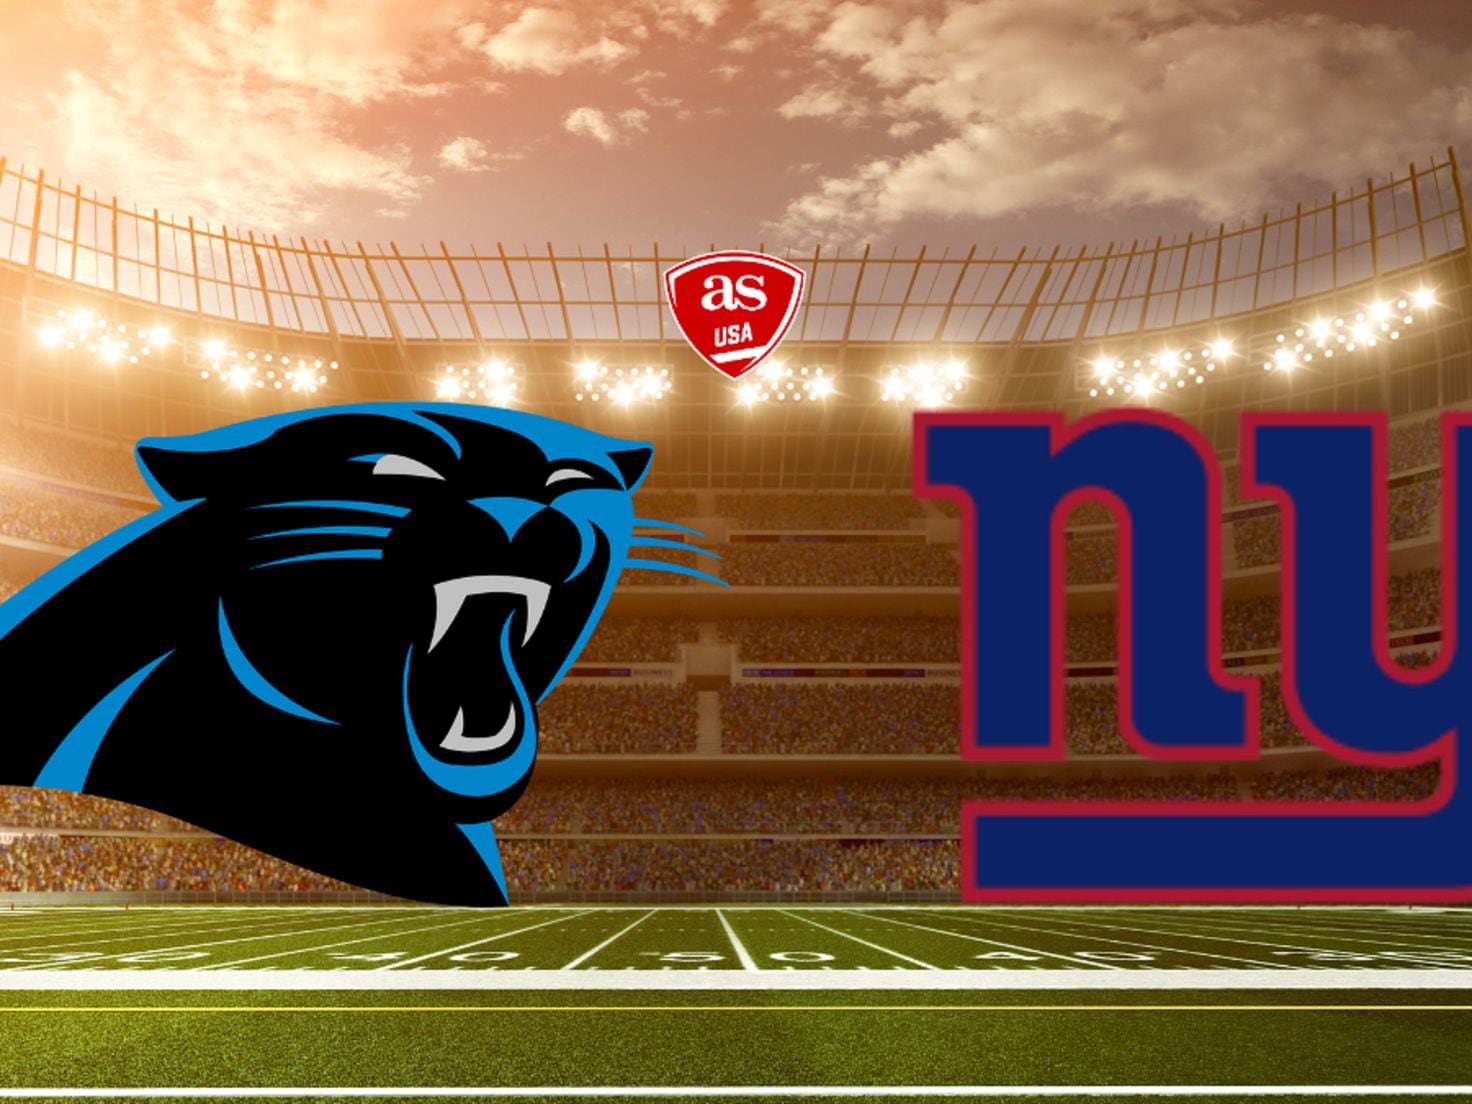 panthers at giants